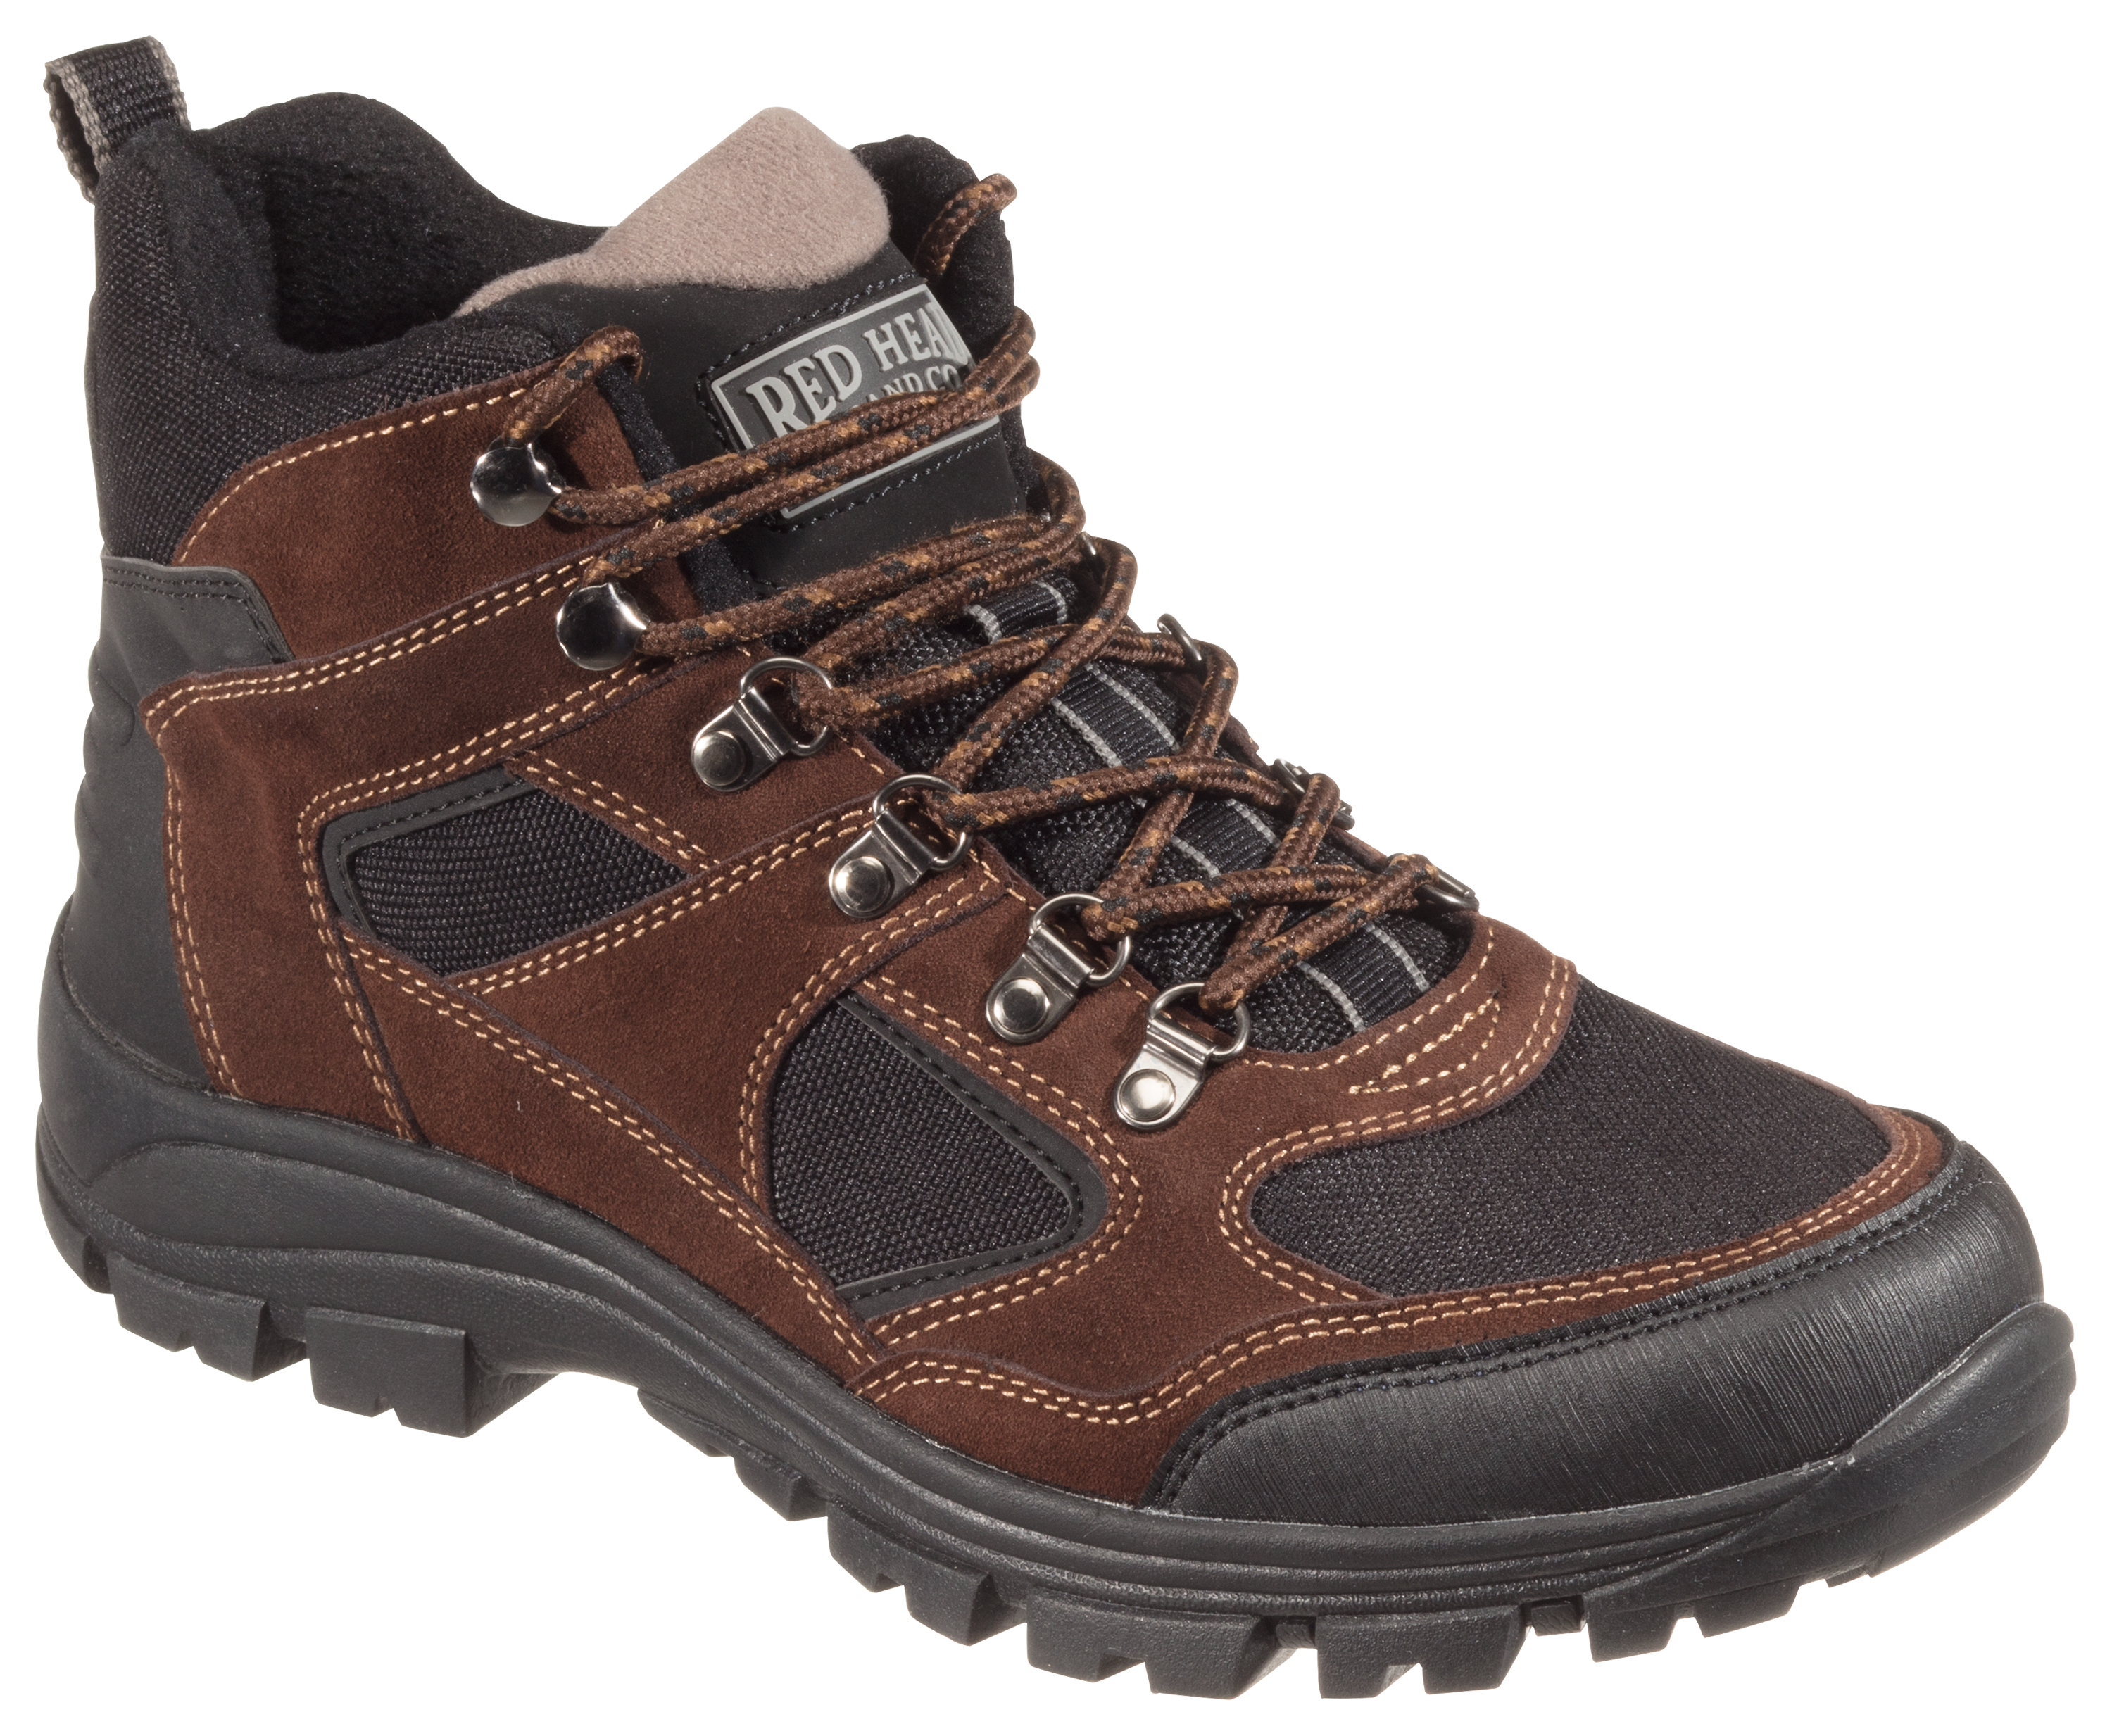 RedHead Everest II Hiking Boots for Men | Bass Pro Shops